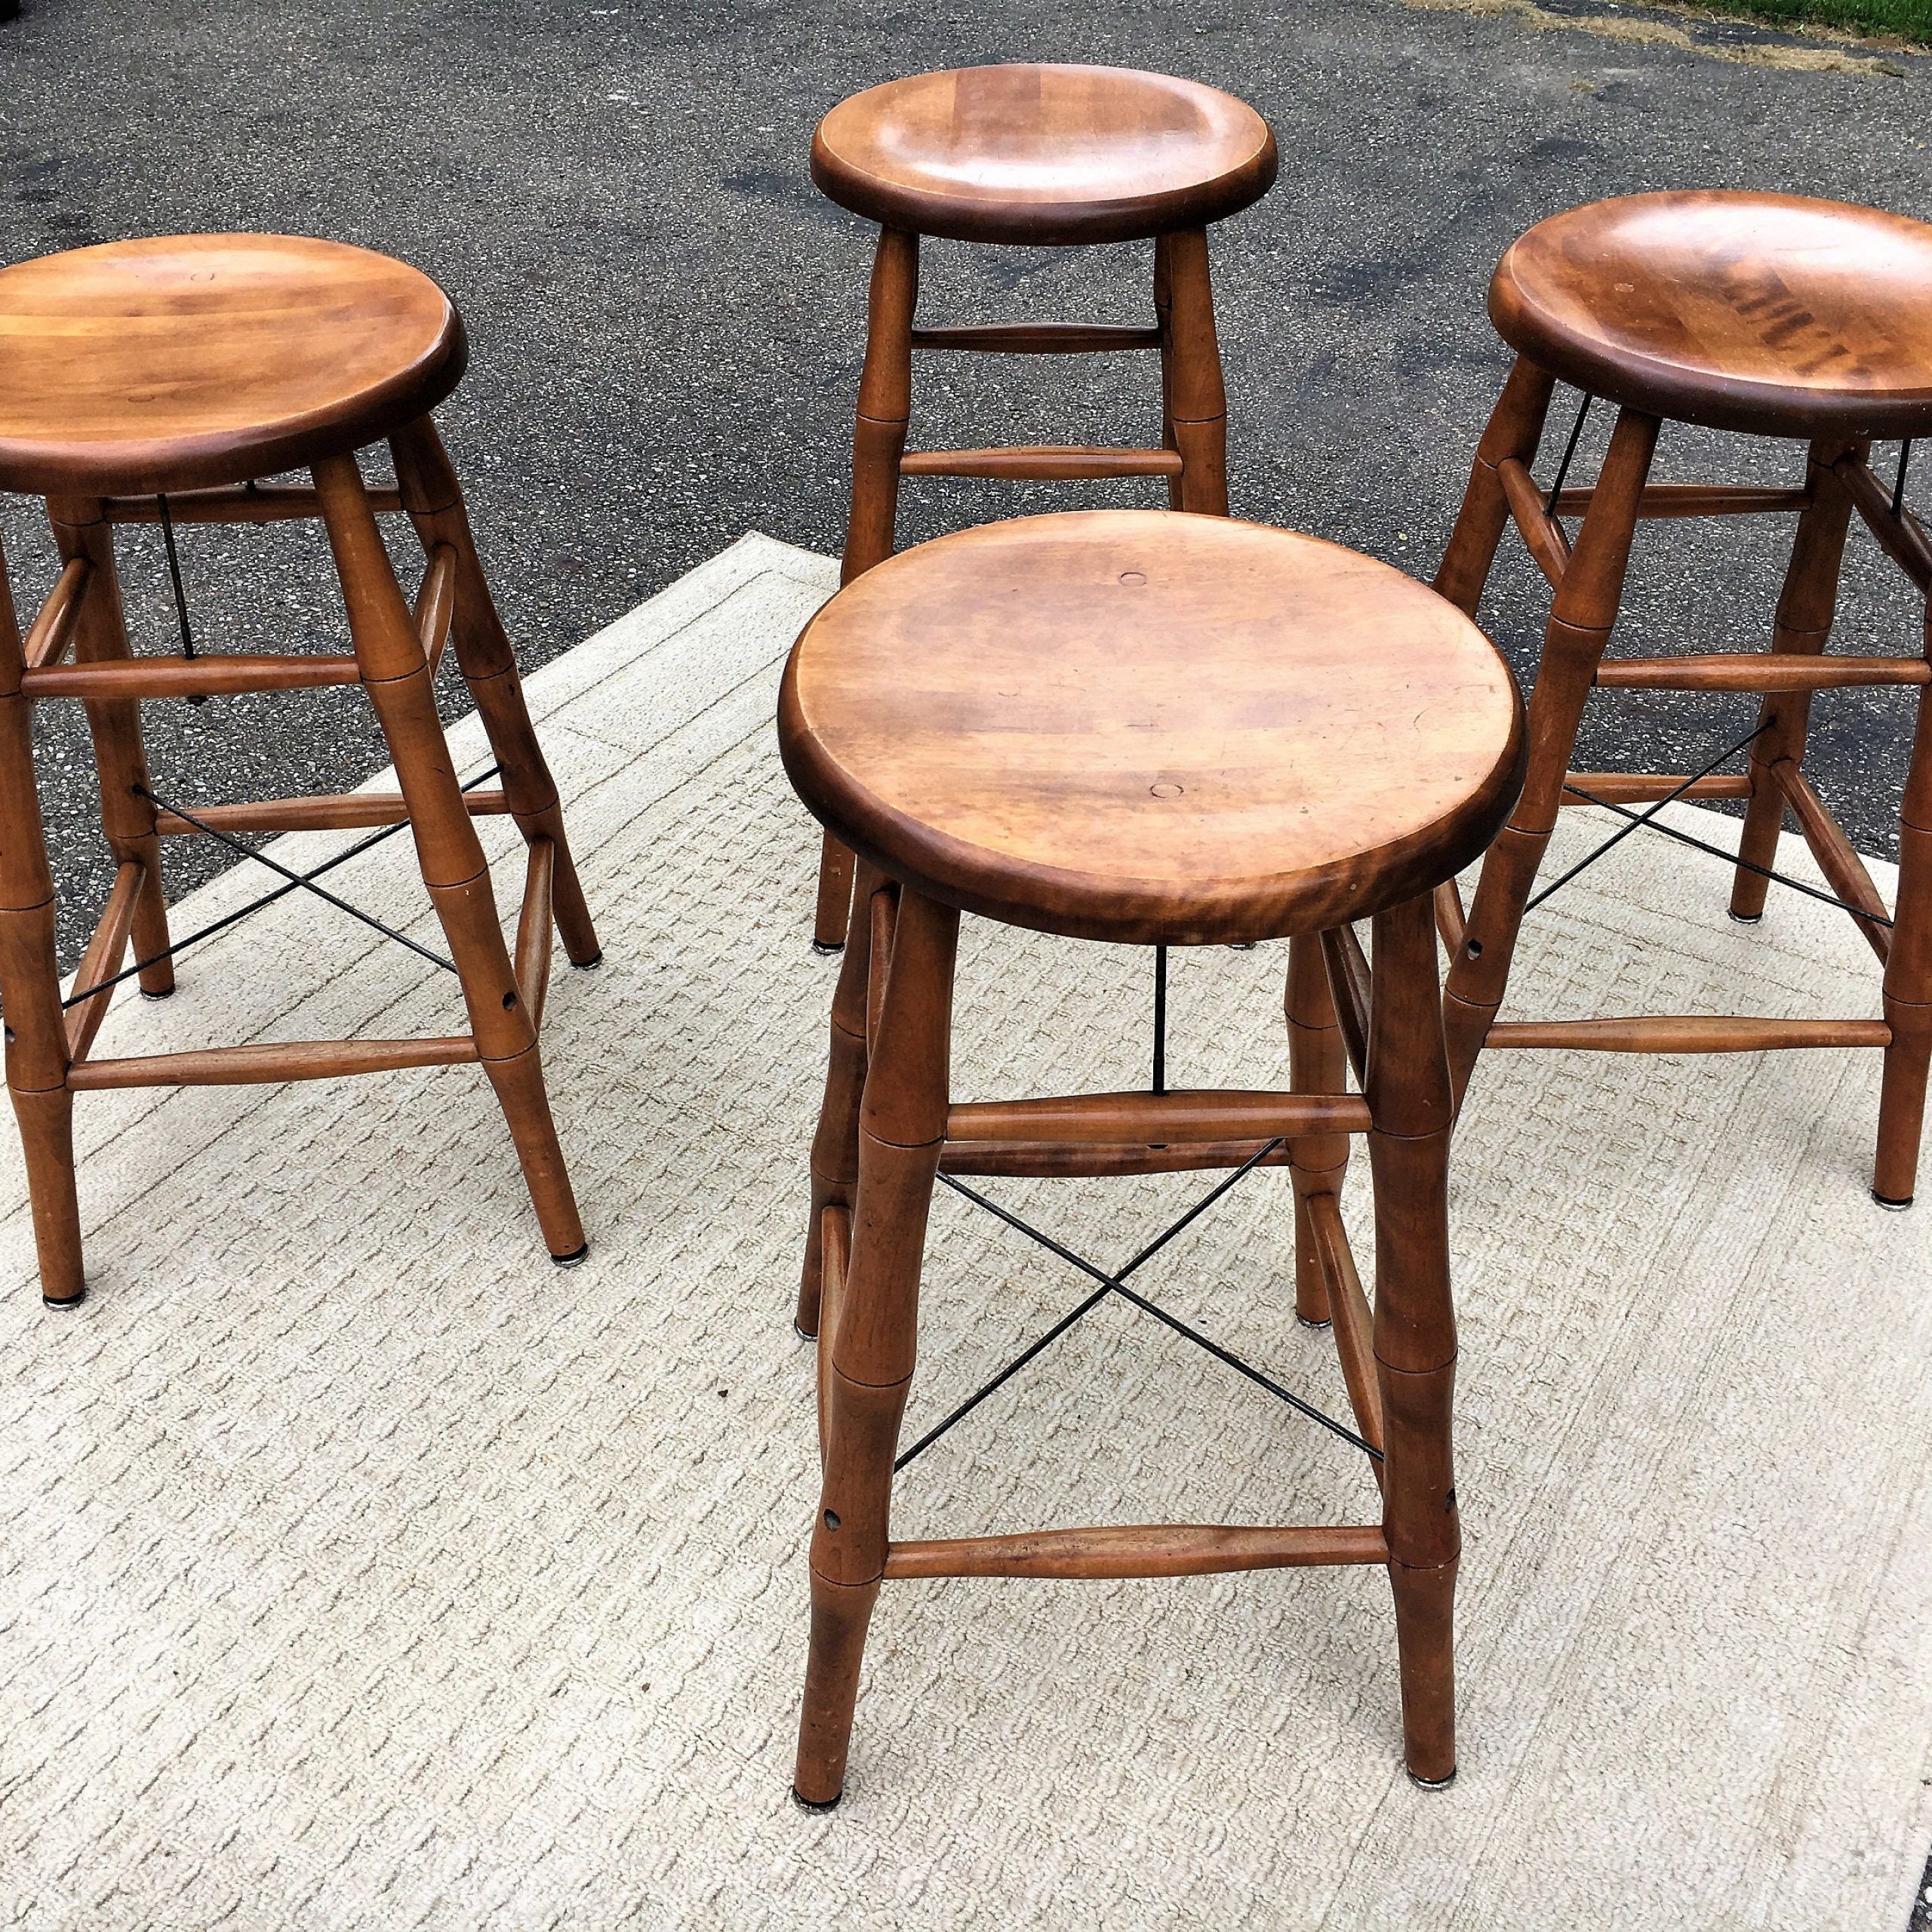 Vintage Maple Bar Stools (4), Bent Bros Stools, Bamboo Style Counter Throughout Favorite Bar Tables With 4 Counter Stools (View 7 of 15)